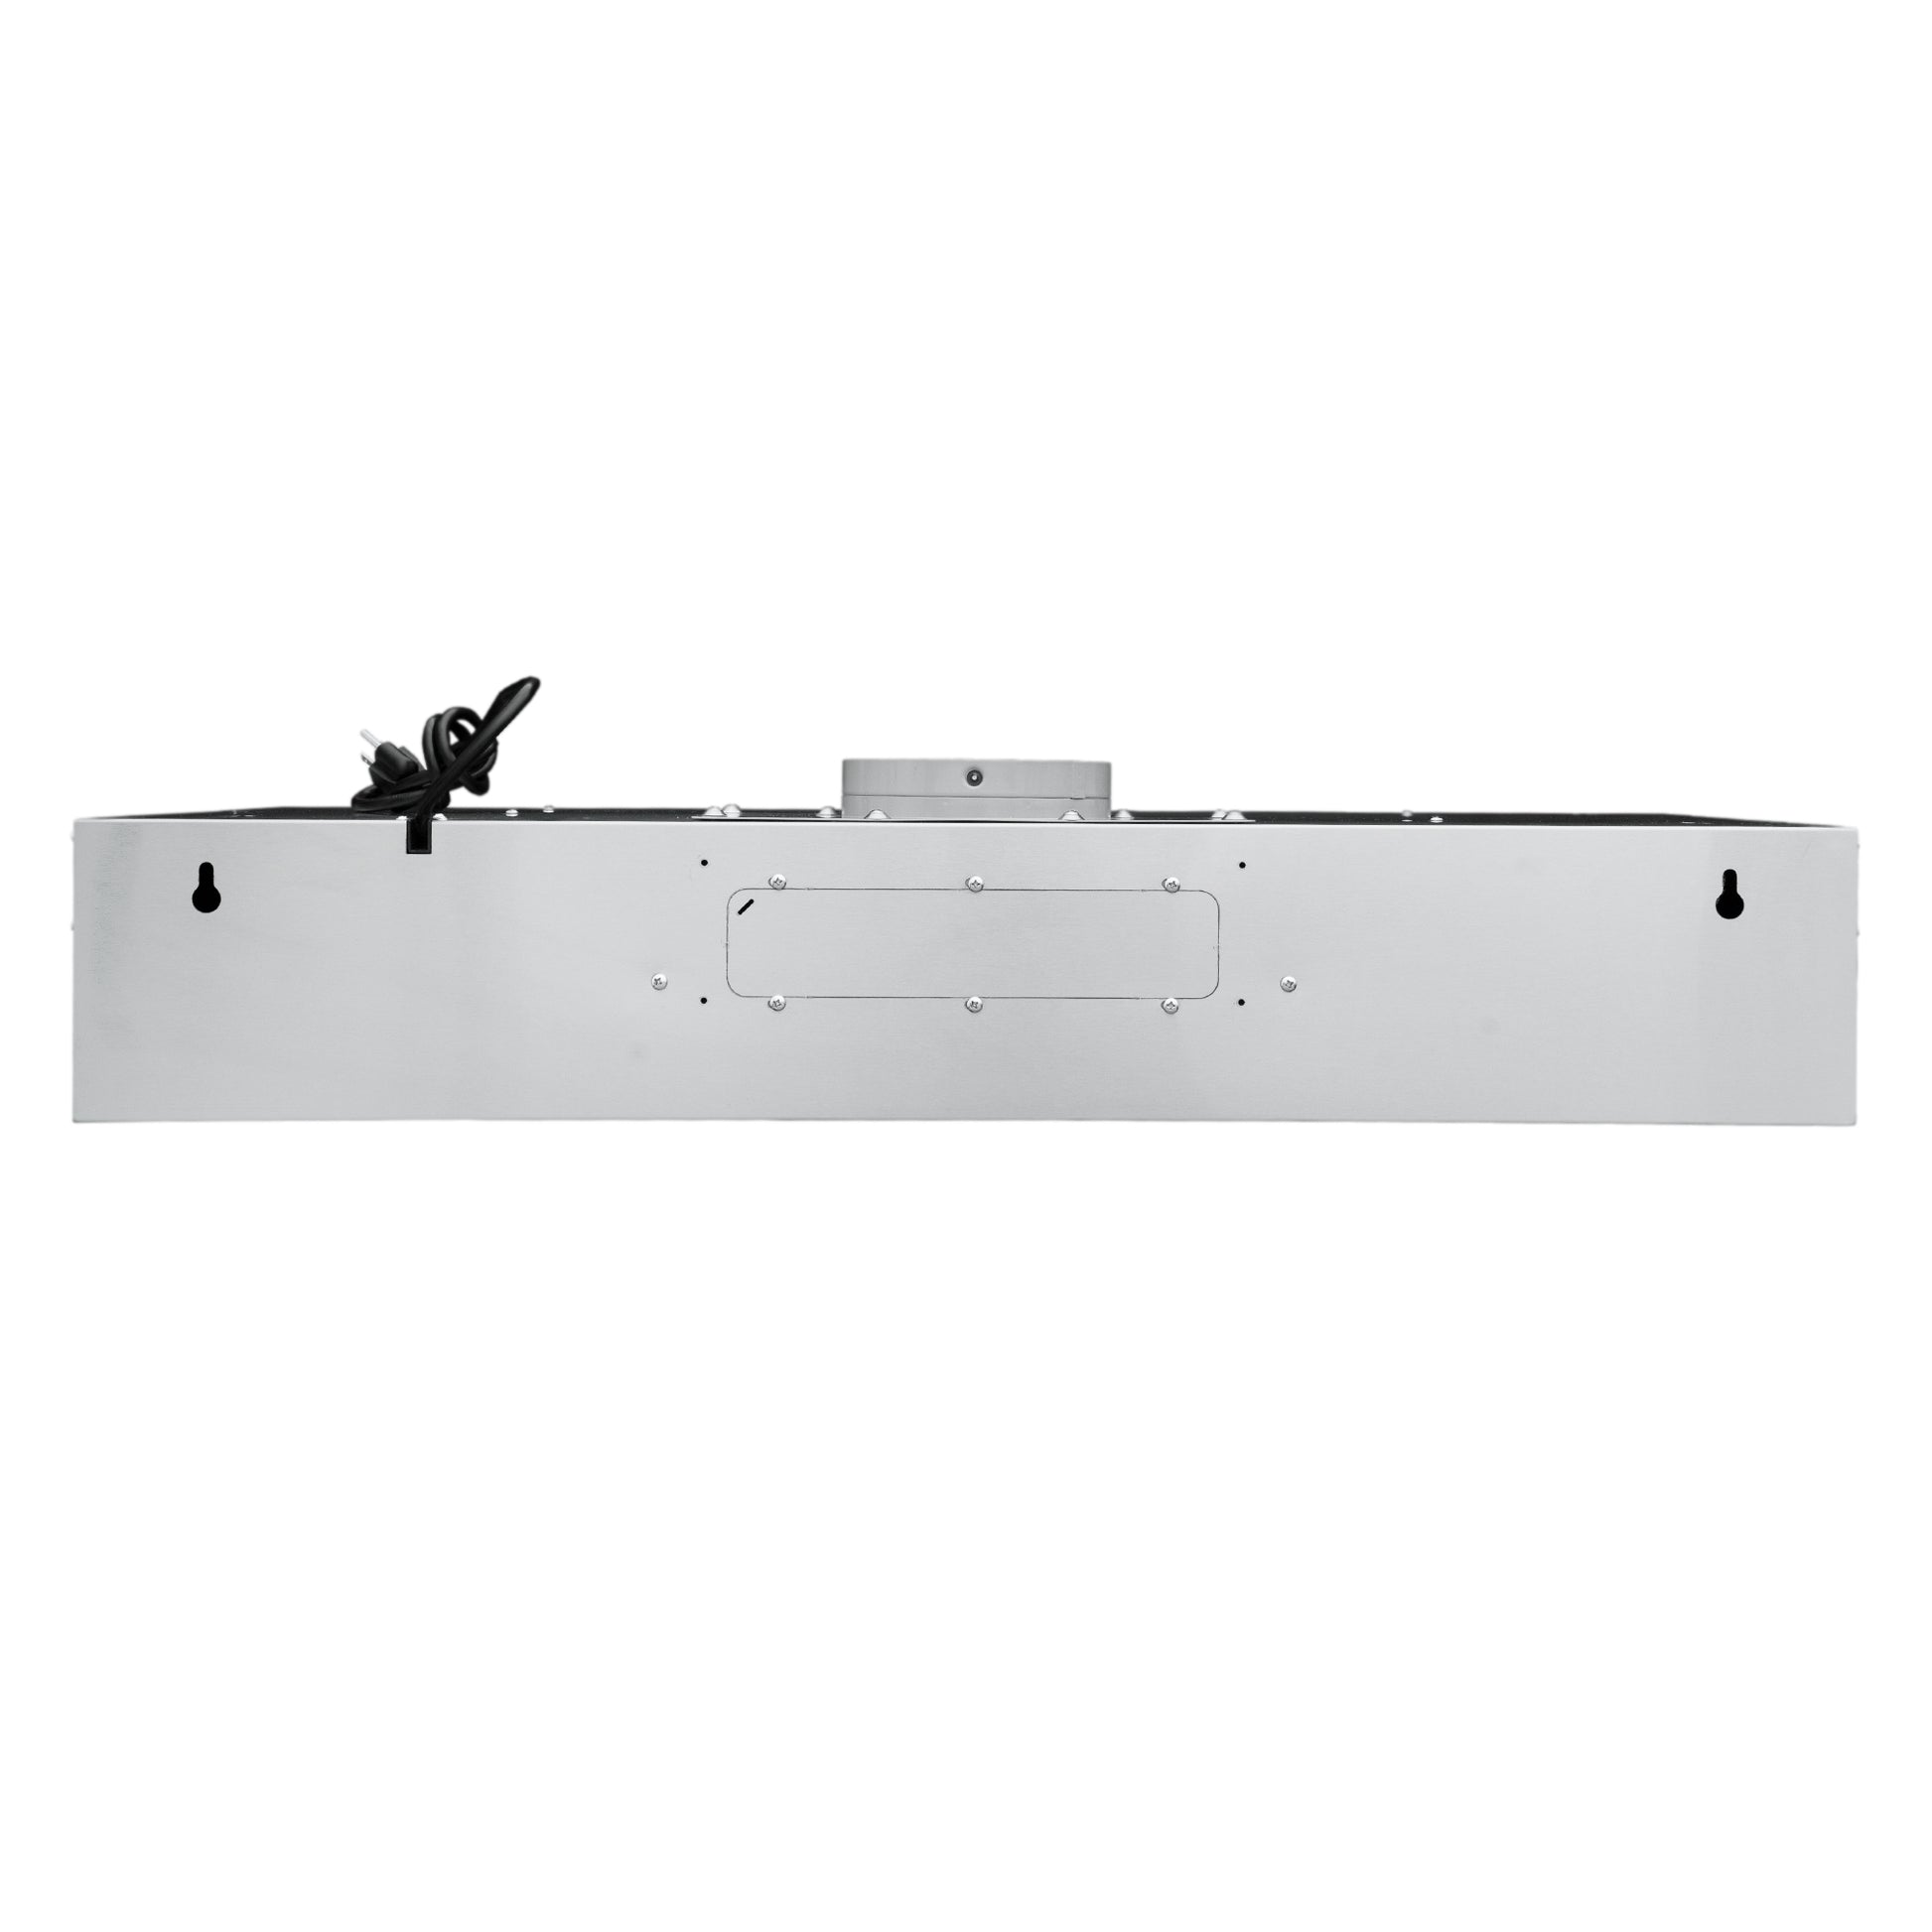 Cosmo 36 in. Stainless Steel Under Cabinet Range Hood with Digital Touch Controls, 3-Speed Fan, LED Lights and Permanent Filters 500 CFM